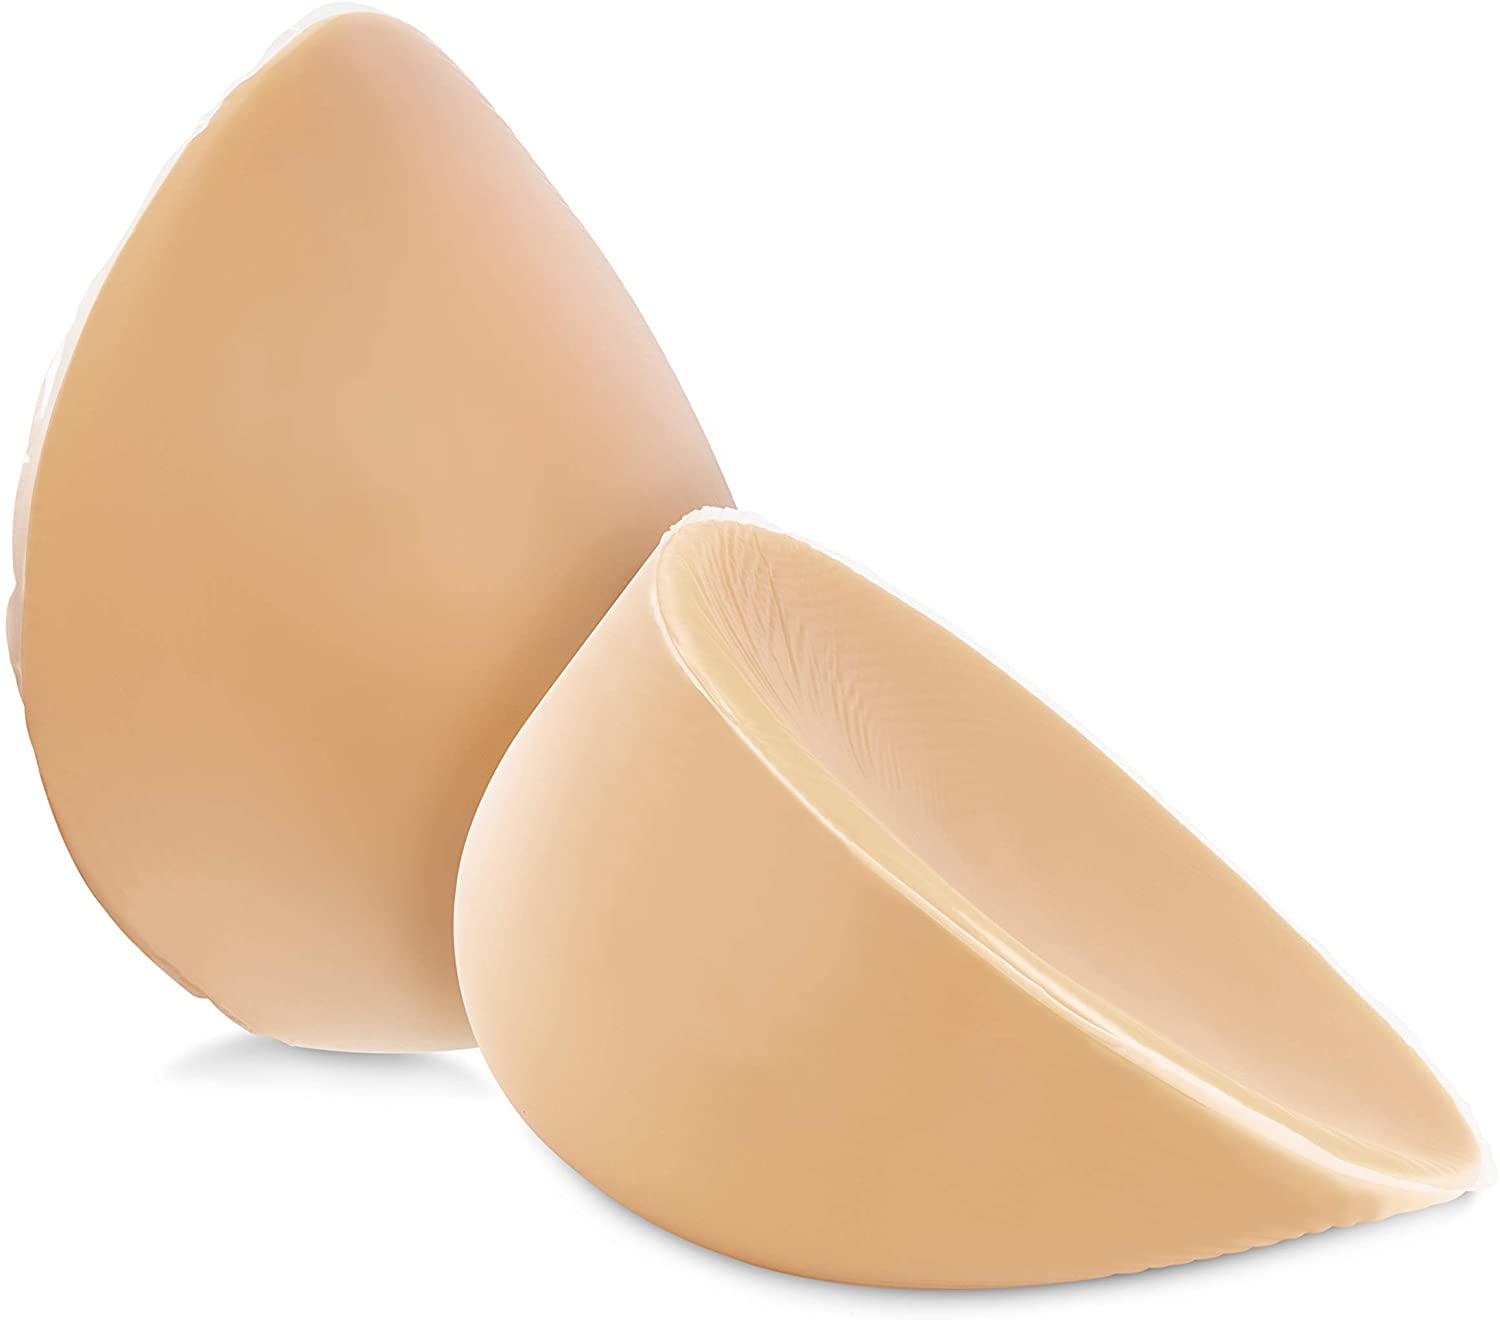 Feminique Silicone Breast Forms for Mastectomy, EE/F Cup (3600g